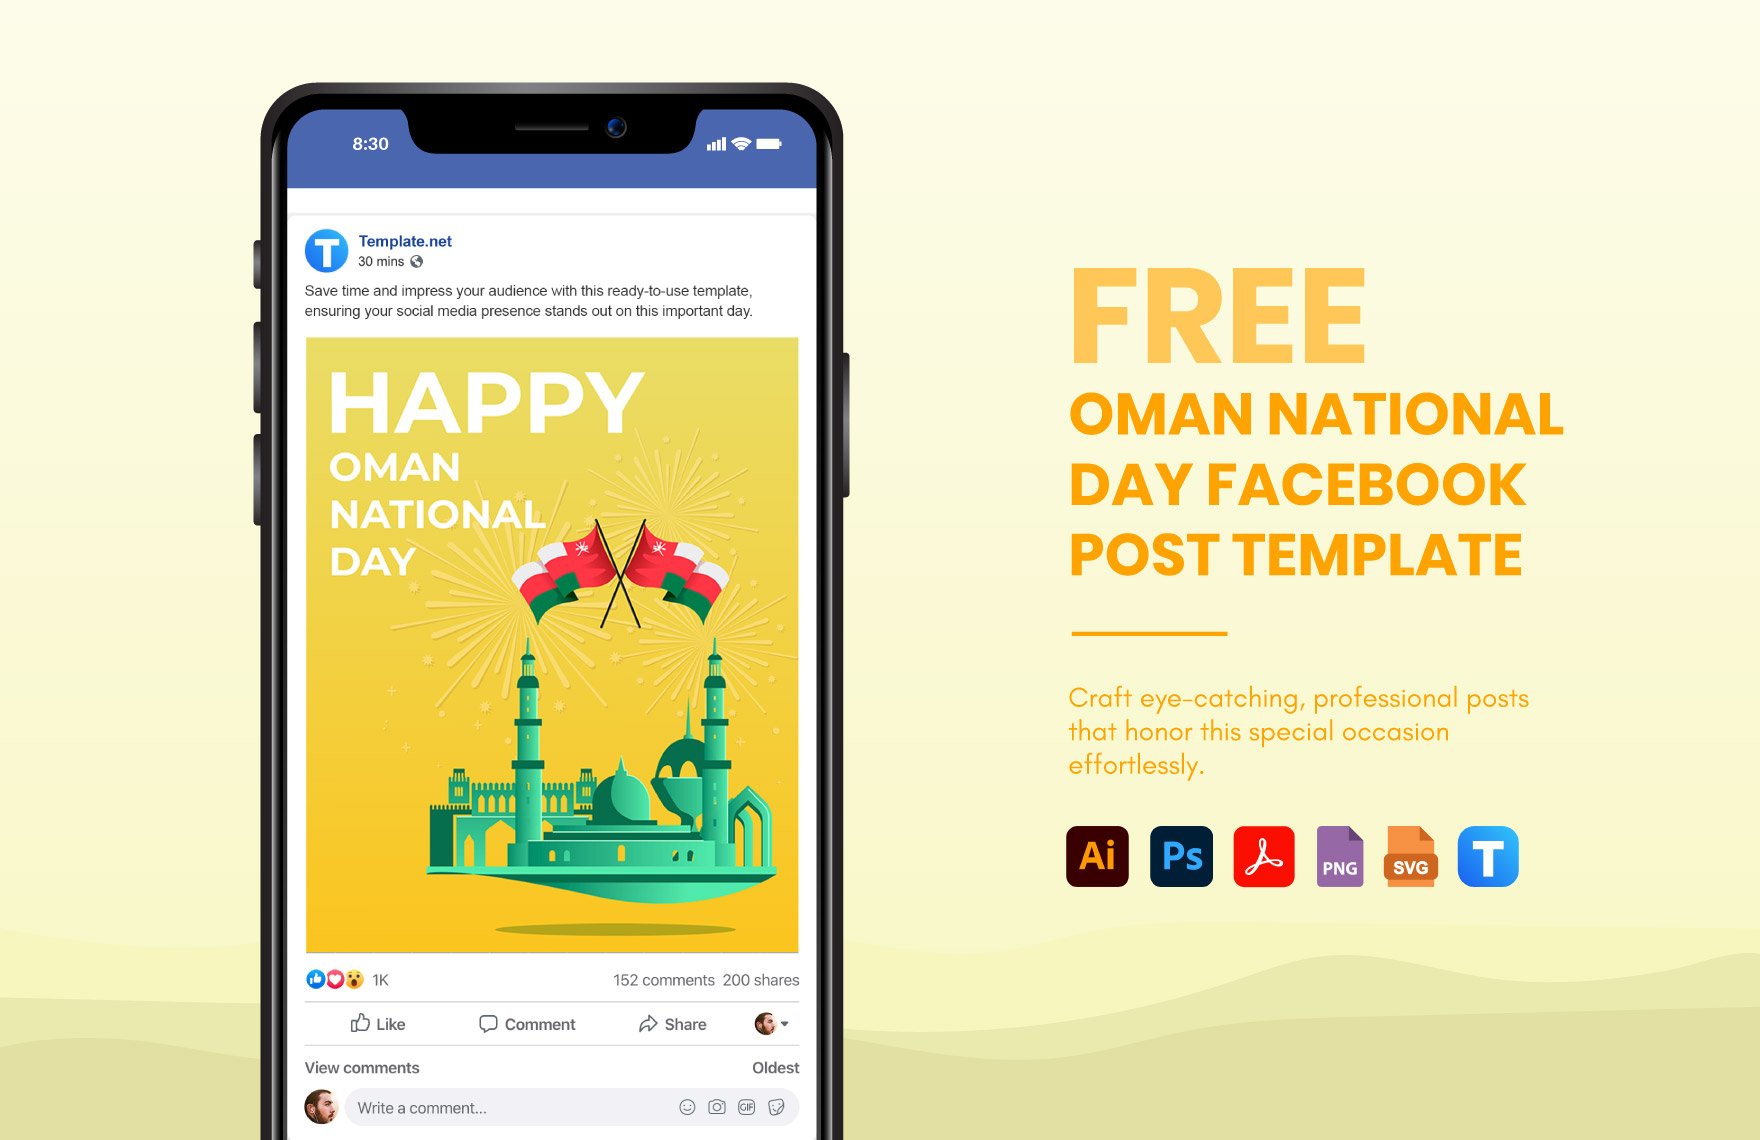 Oman National Day Facebook Post Template